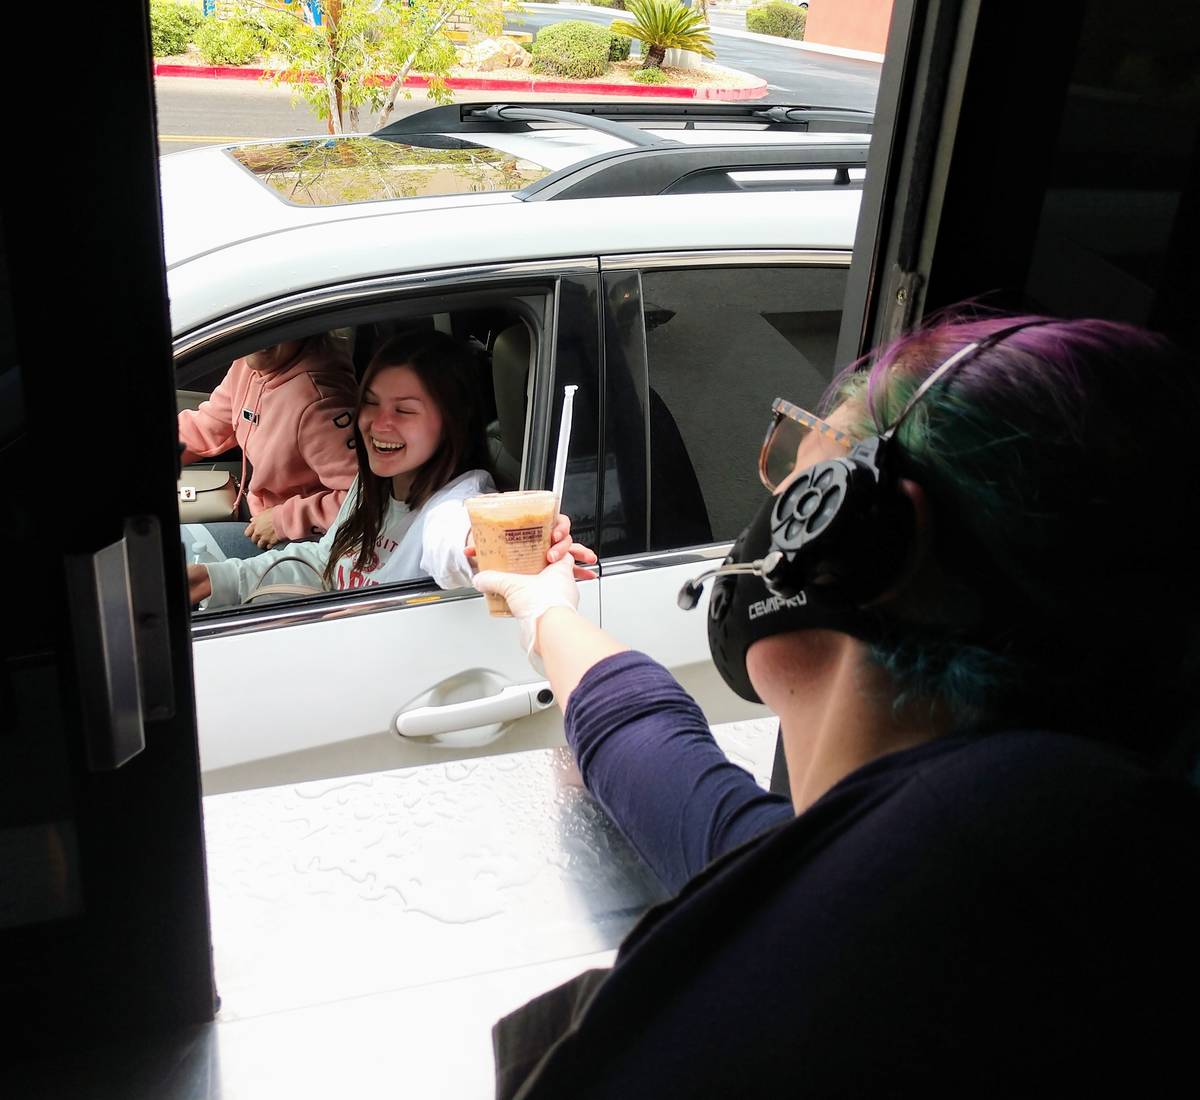 A Coffee Bean & Tea Leaf member hands a drink to a drive-thru customer. (Coffee Bean & Tea Leaf)